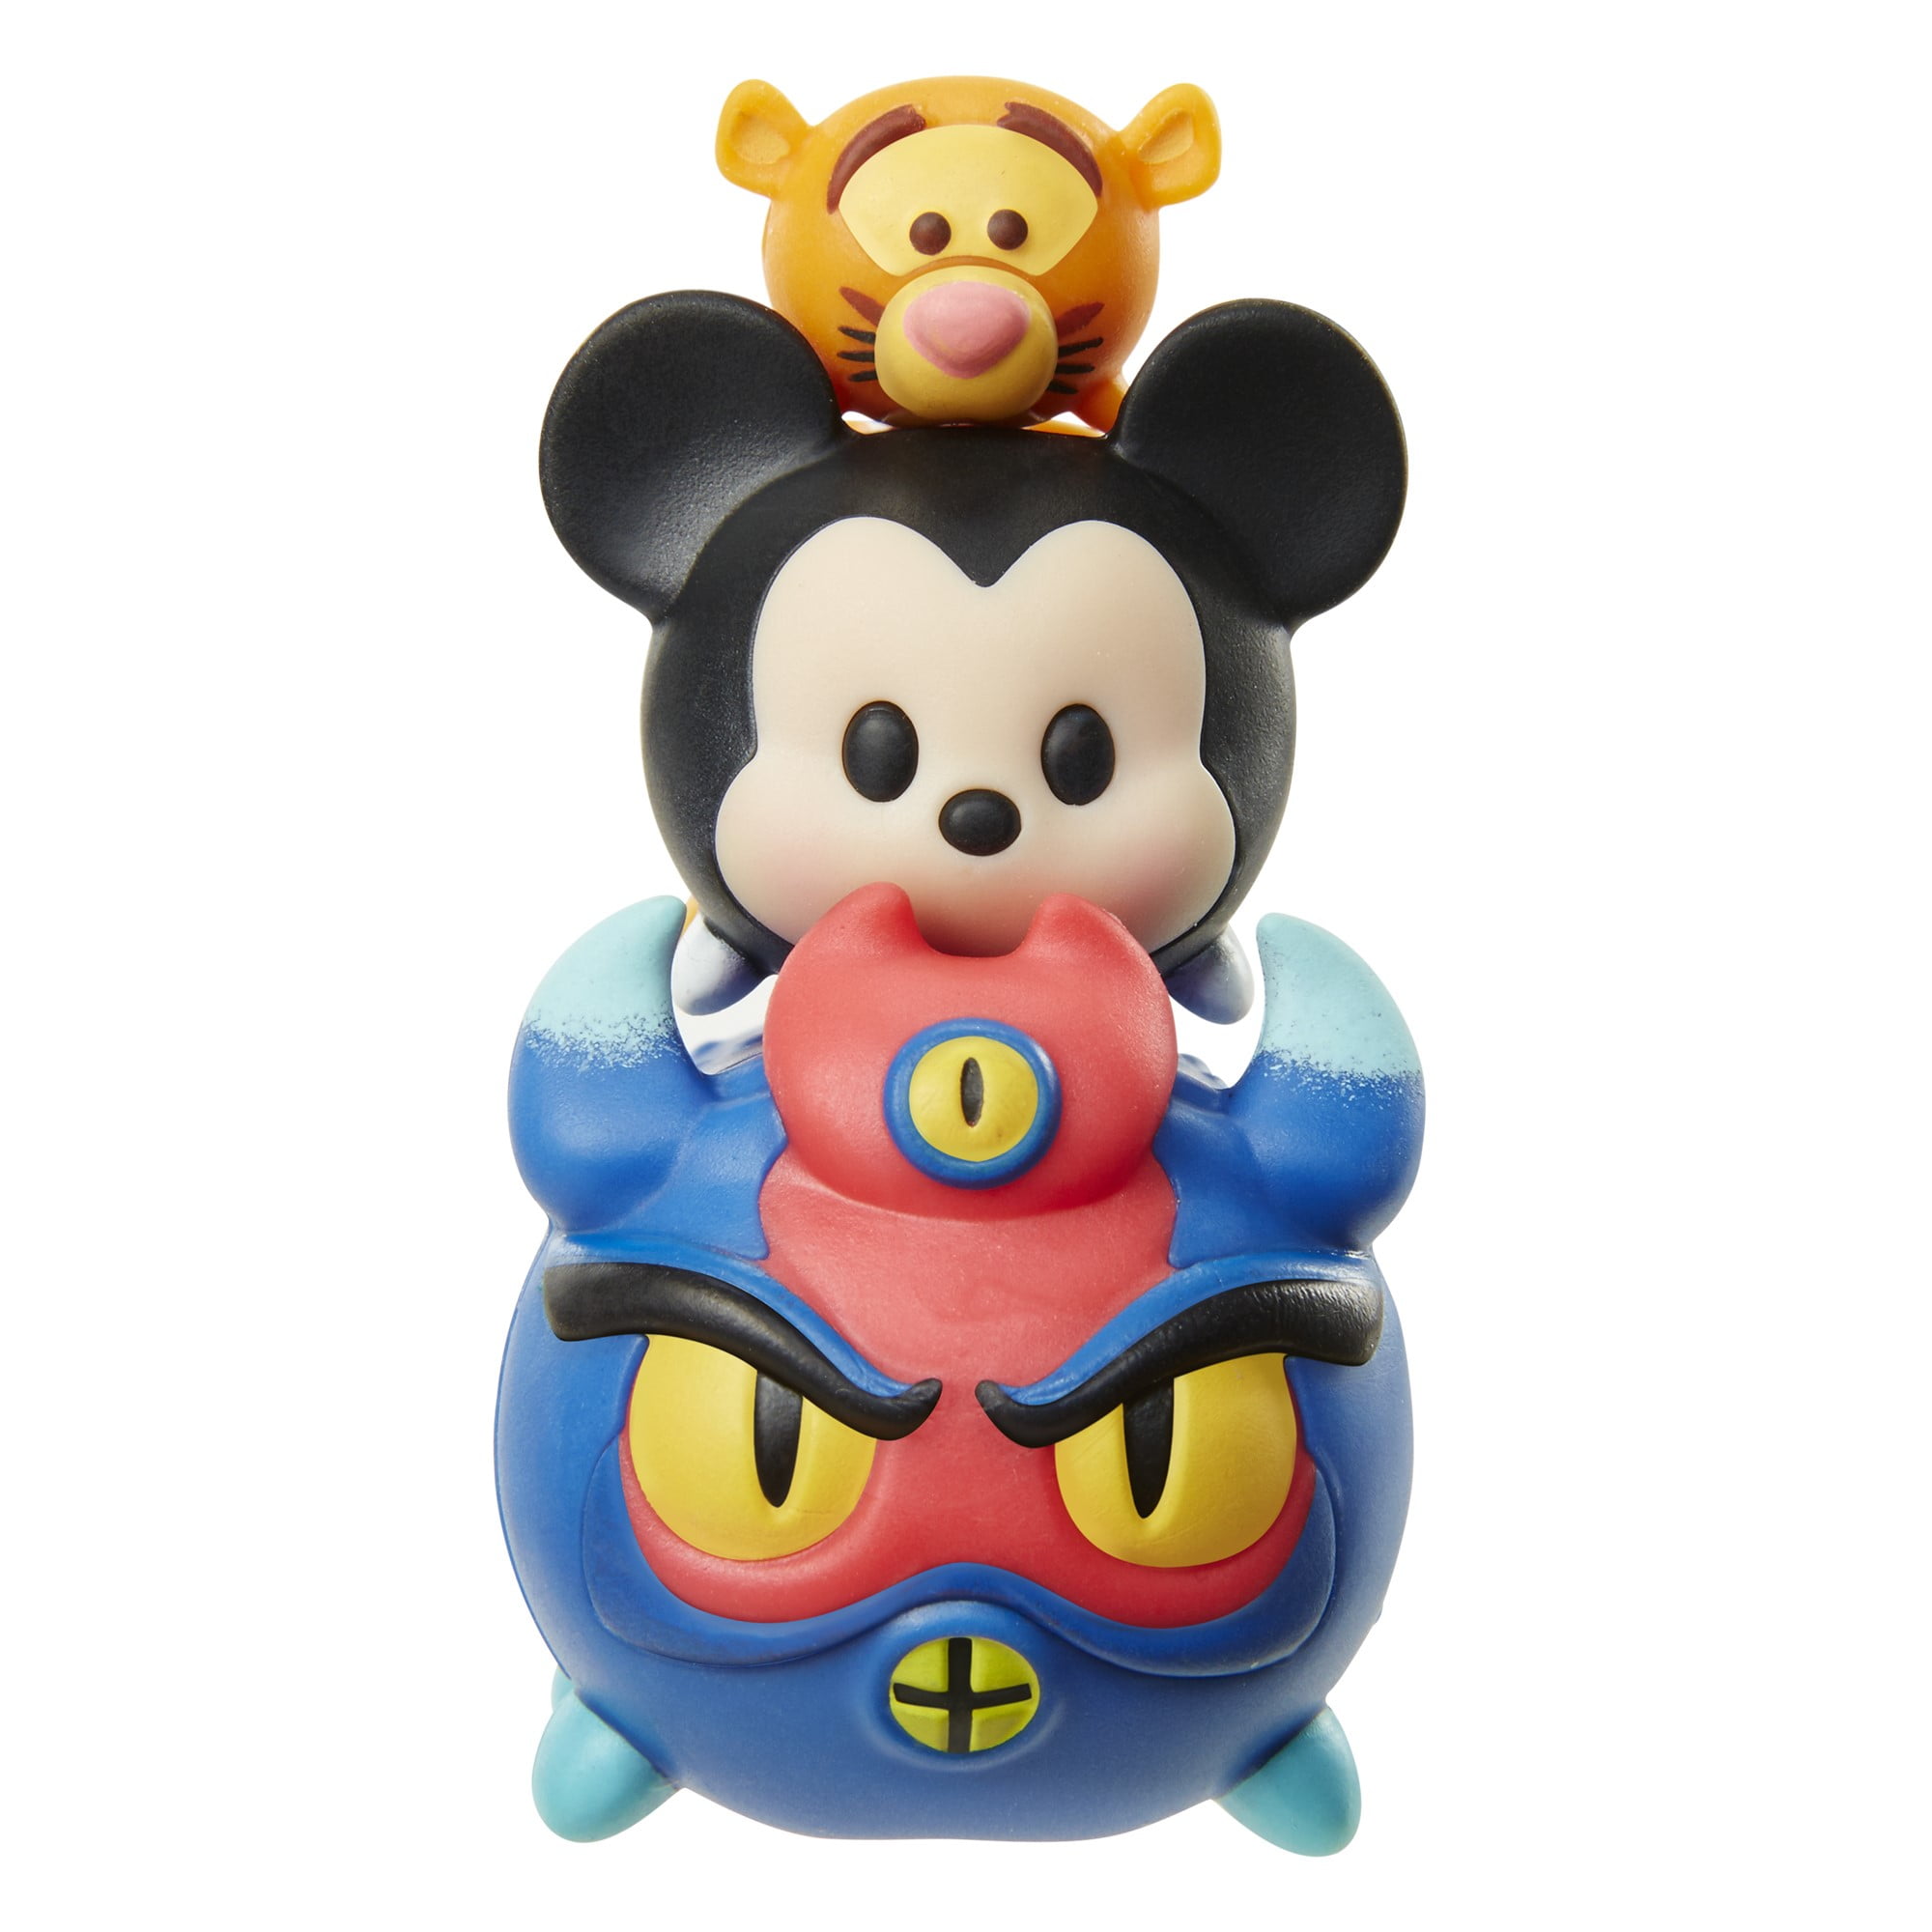 Tsum Tsum 3-Pack Figures - Fred/Mickey/Tigger 